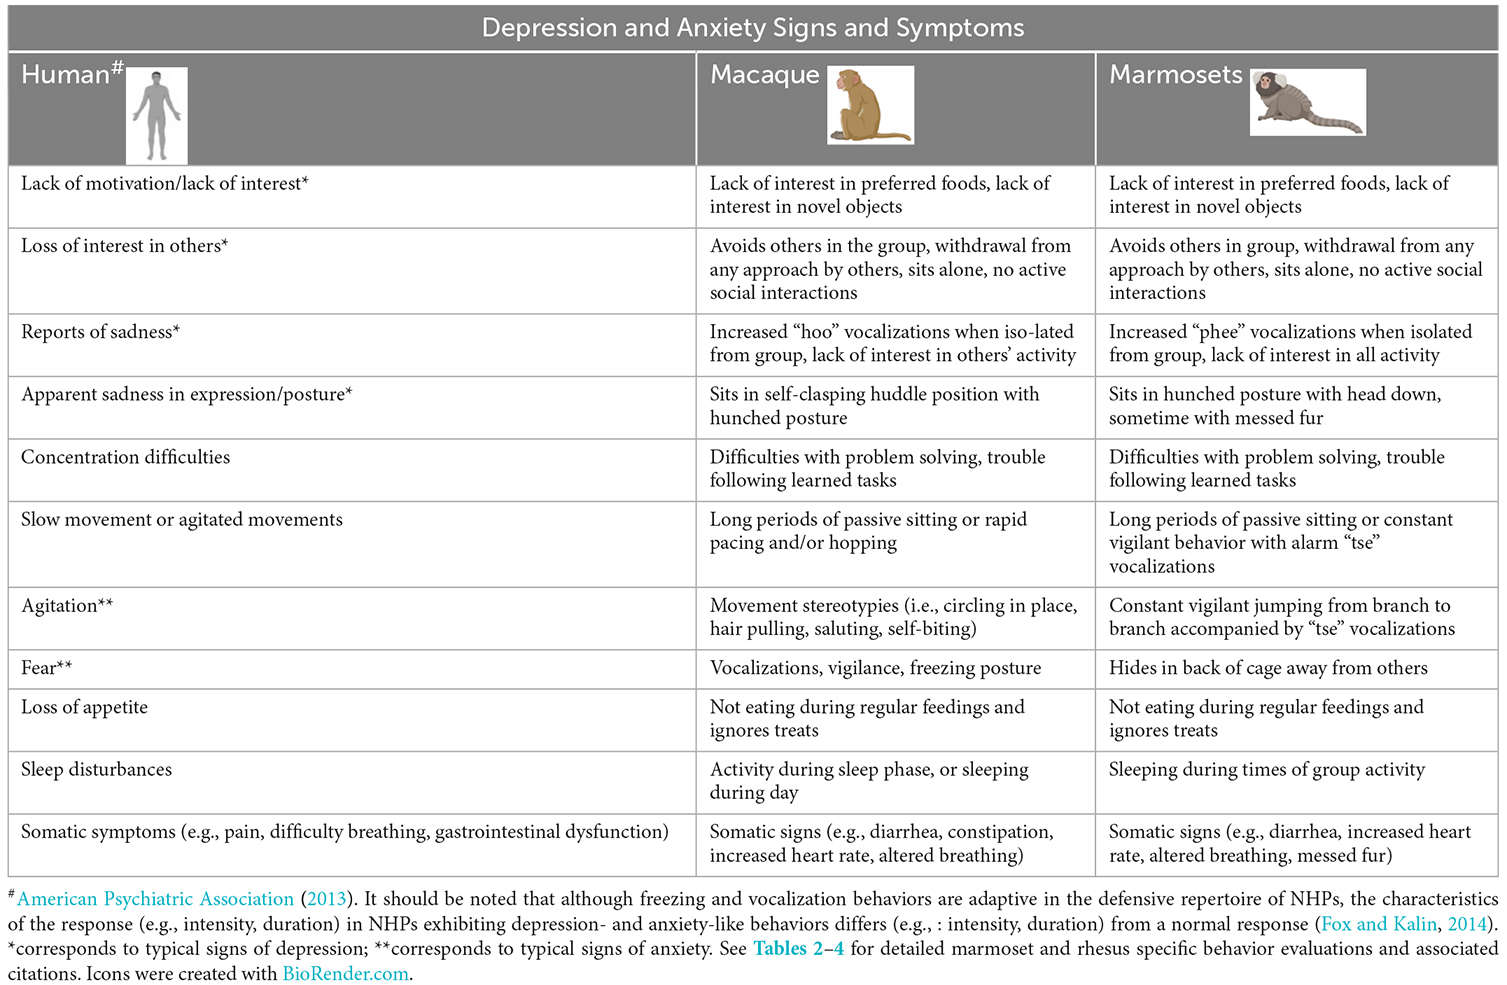 Frontiers  Post-partum depression: From clinical understanding to  preclinical assessments